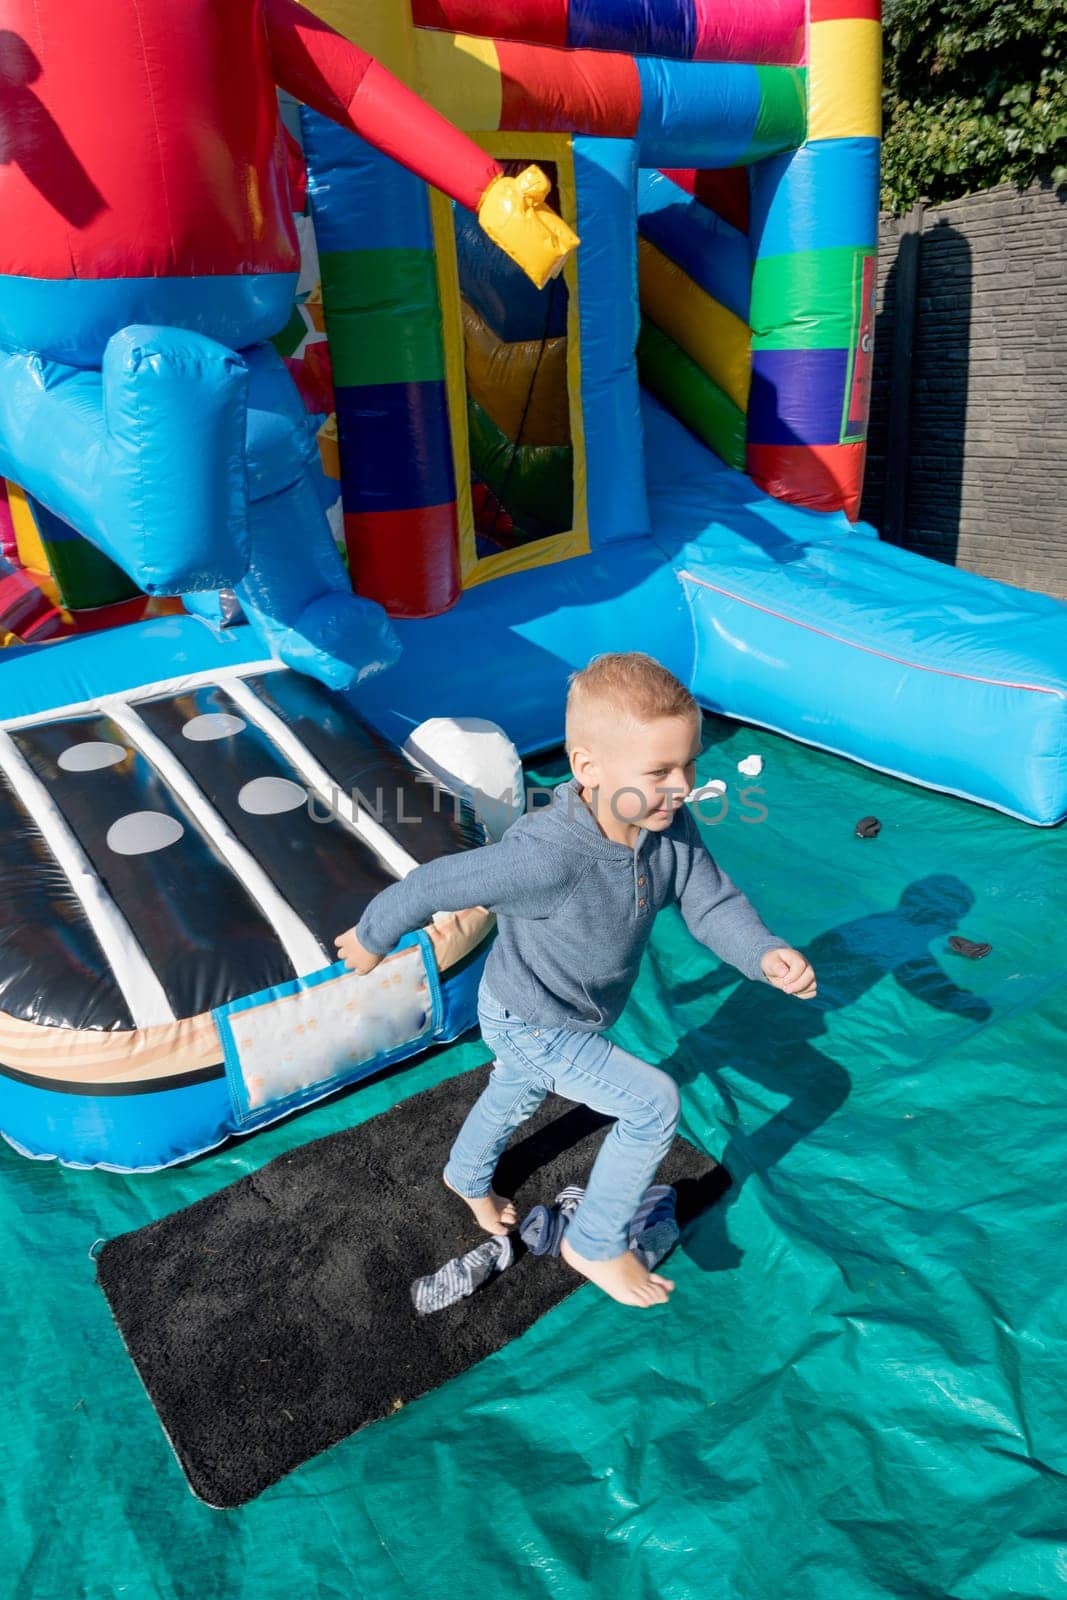 blond boy Child jumping on a colorful trampoline in the park, running away from friends and pursuers to a secret place, Portrait of a happy child High quality photo